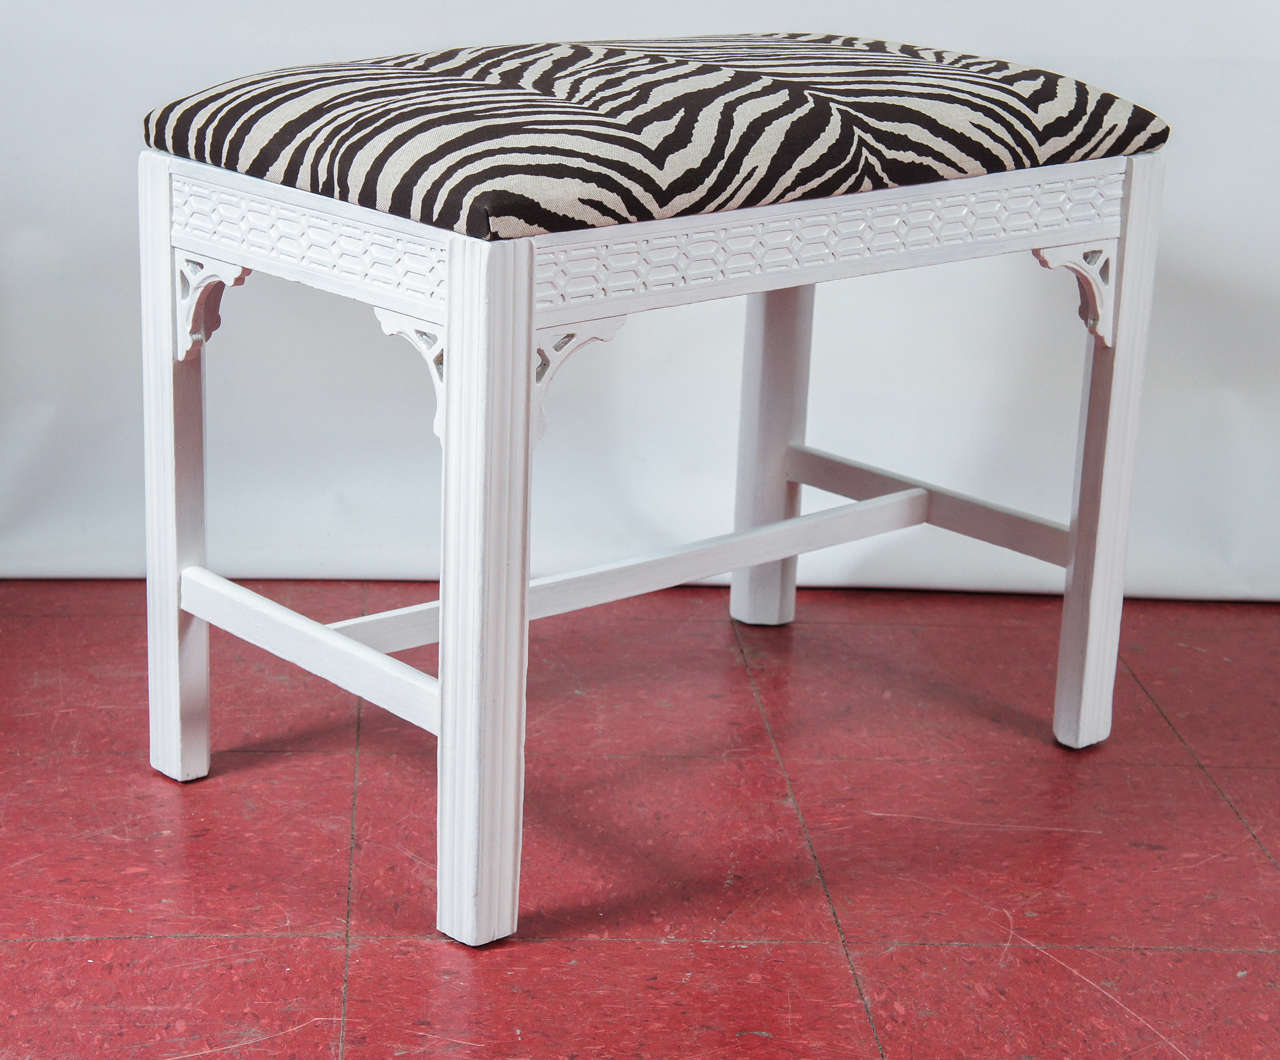 White painted bench/ottoman or stool with zebra linen upholstery, carved apron panels, decorative corner brackets and stretchers.